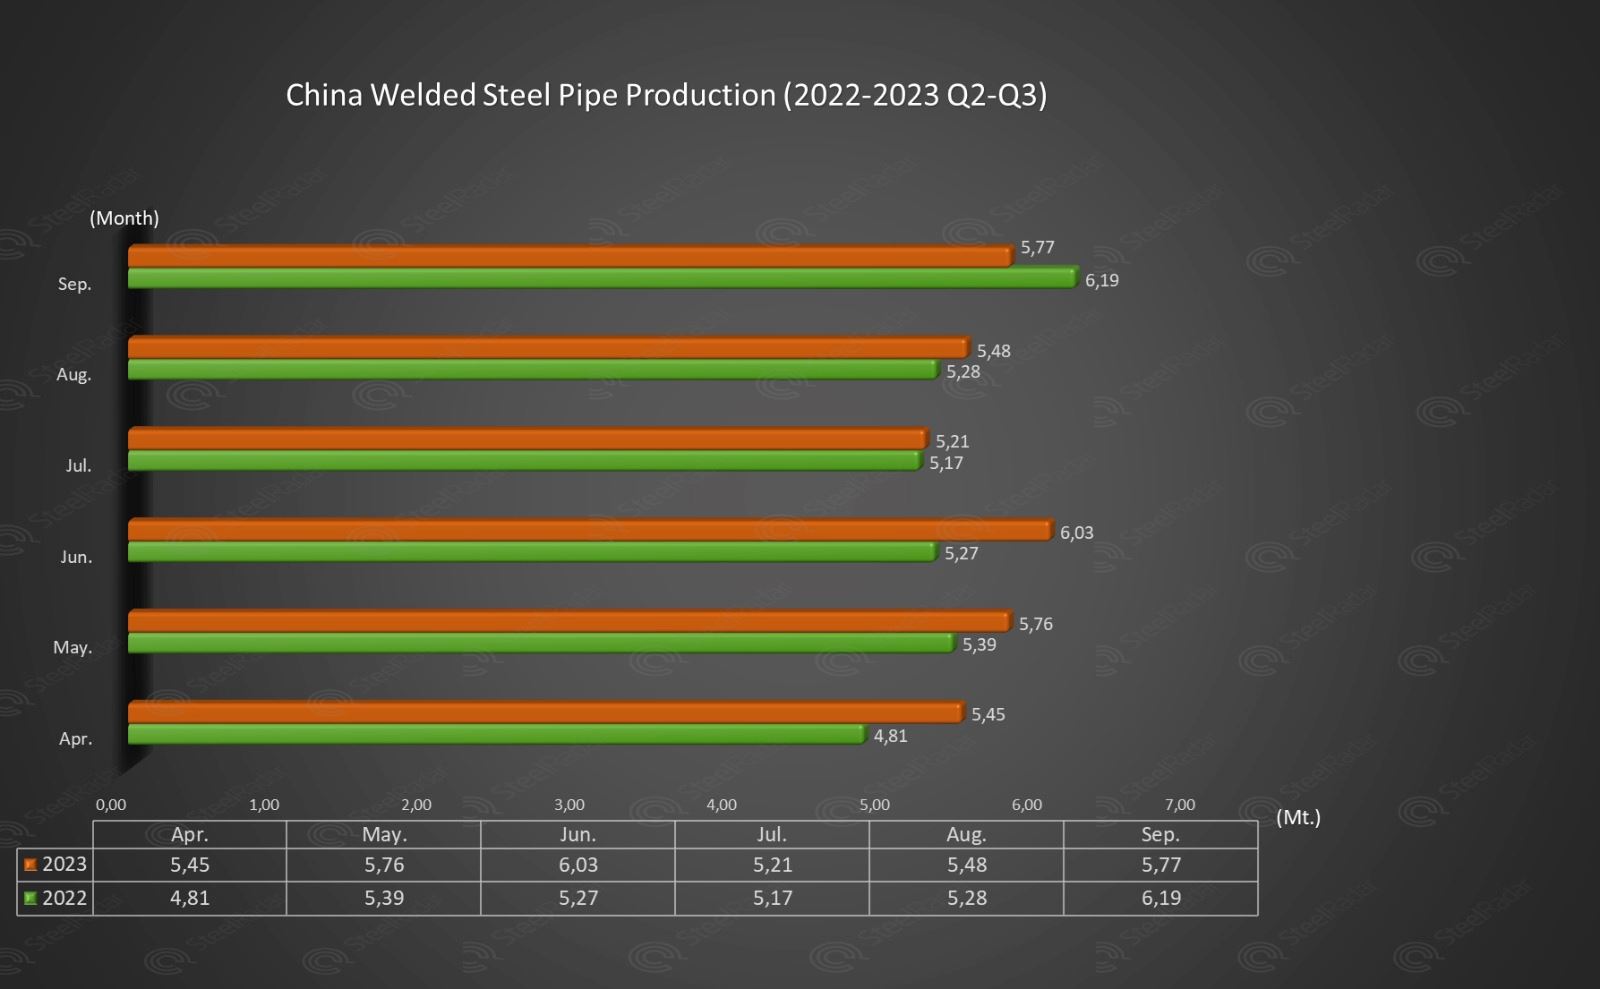 China's welded steel pipe output increased in September